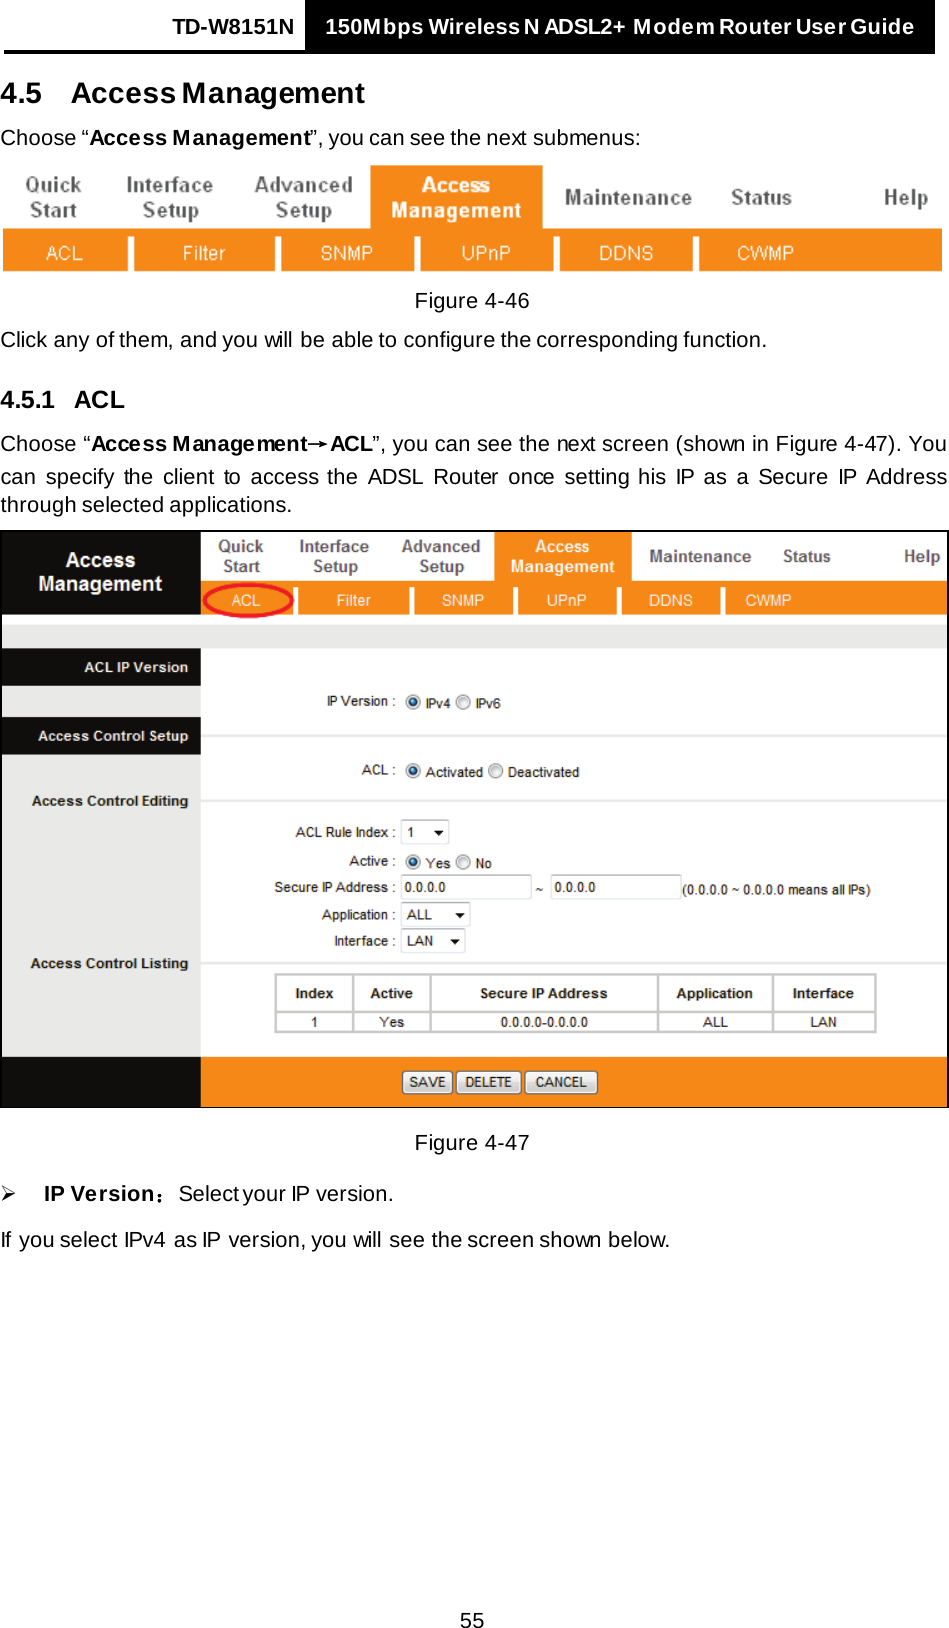 TD-W8151N 150Mbps Wireless N ADSL2+ Modem Router User Guide   55 4.5 Access Management Choose “Access Management”, you can see the next submenus:  Figure 4-46 Click any of them, and you will be able to configure the corresponding function. 4.5.1 ACL Choose “Access Management→ACL”, you can see the next screen (shown in Figure 4-47). You can  specify  the client to  access the ADSL Router once setting his IP as a Secure IP Address through selected applications.  Figure 4-47    IP Version：Select your IP version. If  you select IPv4 as IP version, you will see the screen shown below. 